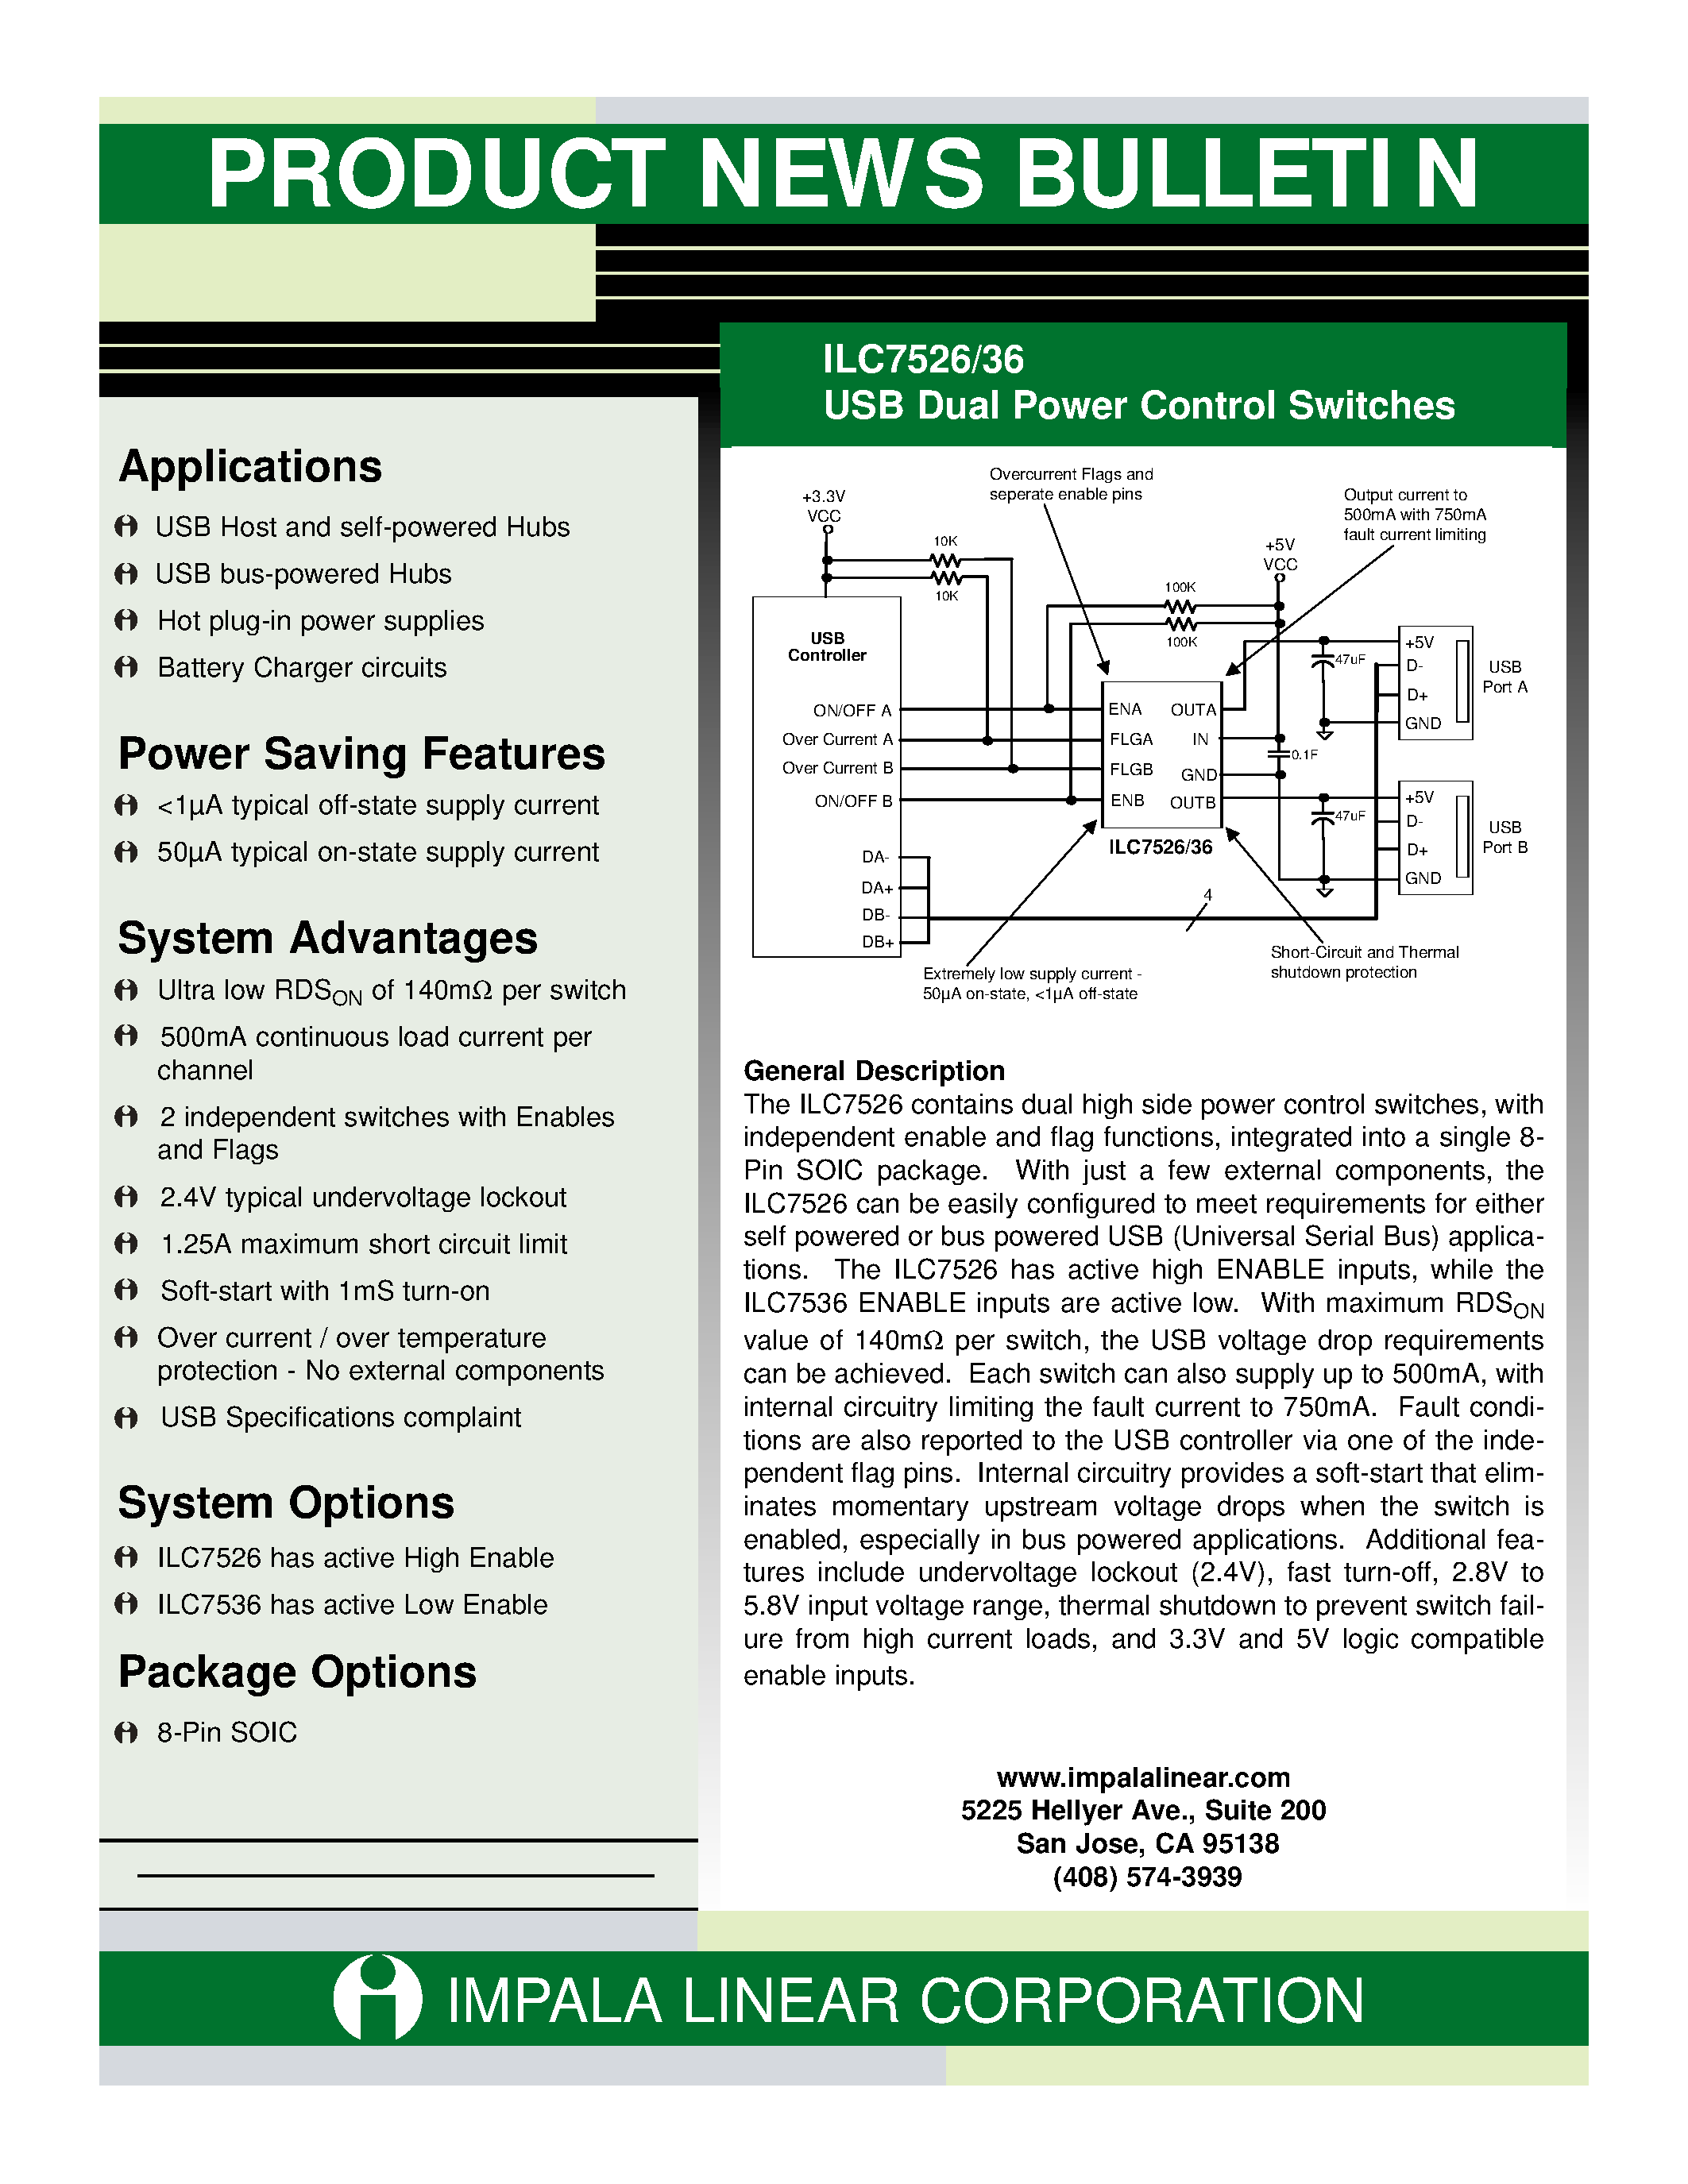 Datasheet ILC7536 - USB DUAL POWER CONTROL SWITCHES page 1